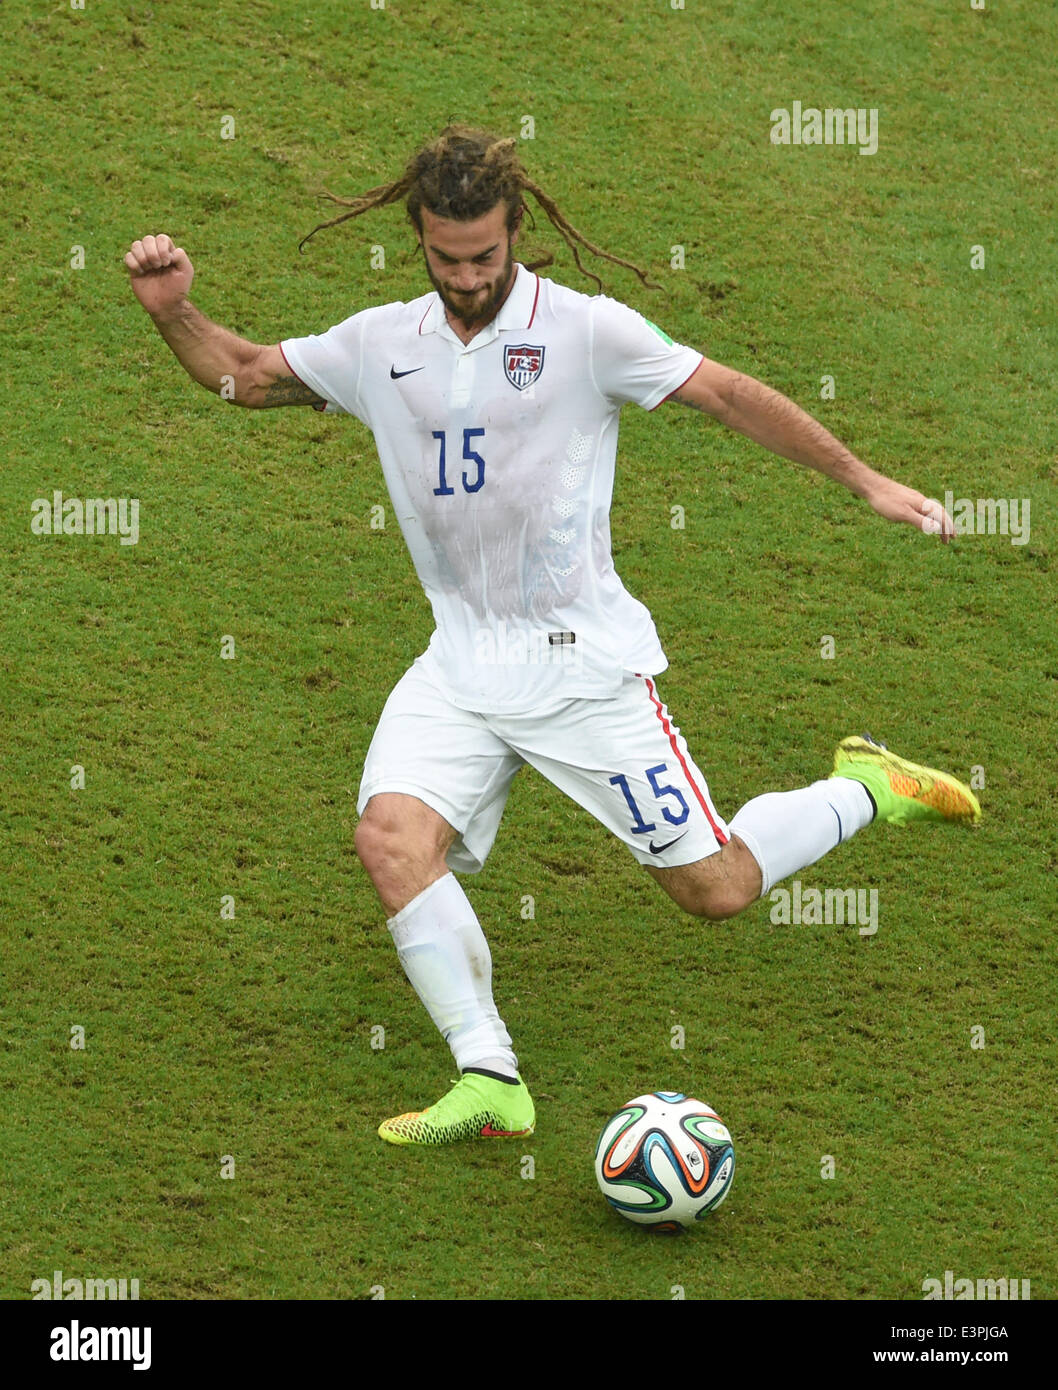 Recife, Brazil. 26th June, 2014. Kyle Beckerman of the US controls the ball during the FIFA World Cup group G preliminary round match between the USA and Germany at Arena Pernambuco in Recife, Brazil, 26 June 2014. The FIFA World Cup 2014 will take place in Brazil from 12 June to 13 July 2014. Photo: Andreas Gebert/dpa/Alamy Live News Stock Photo